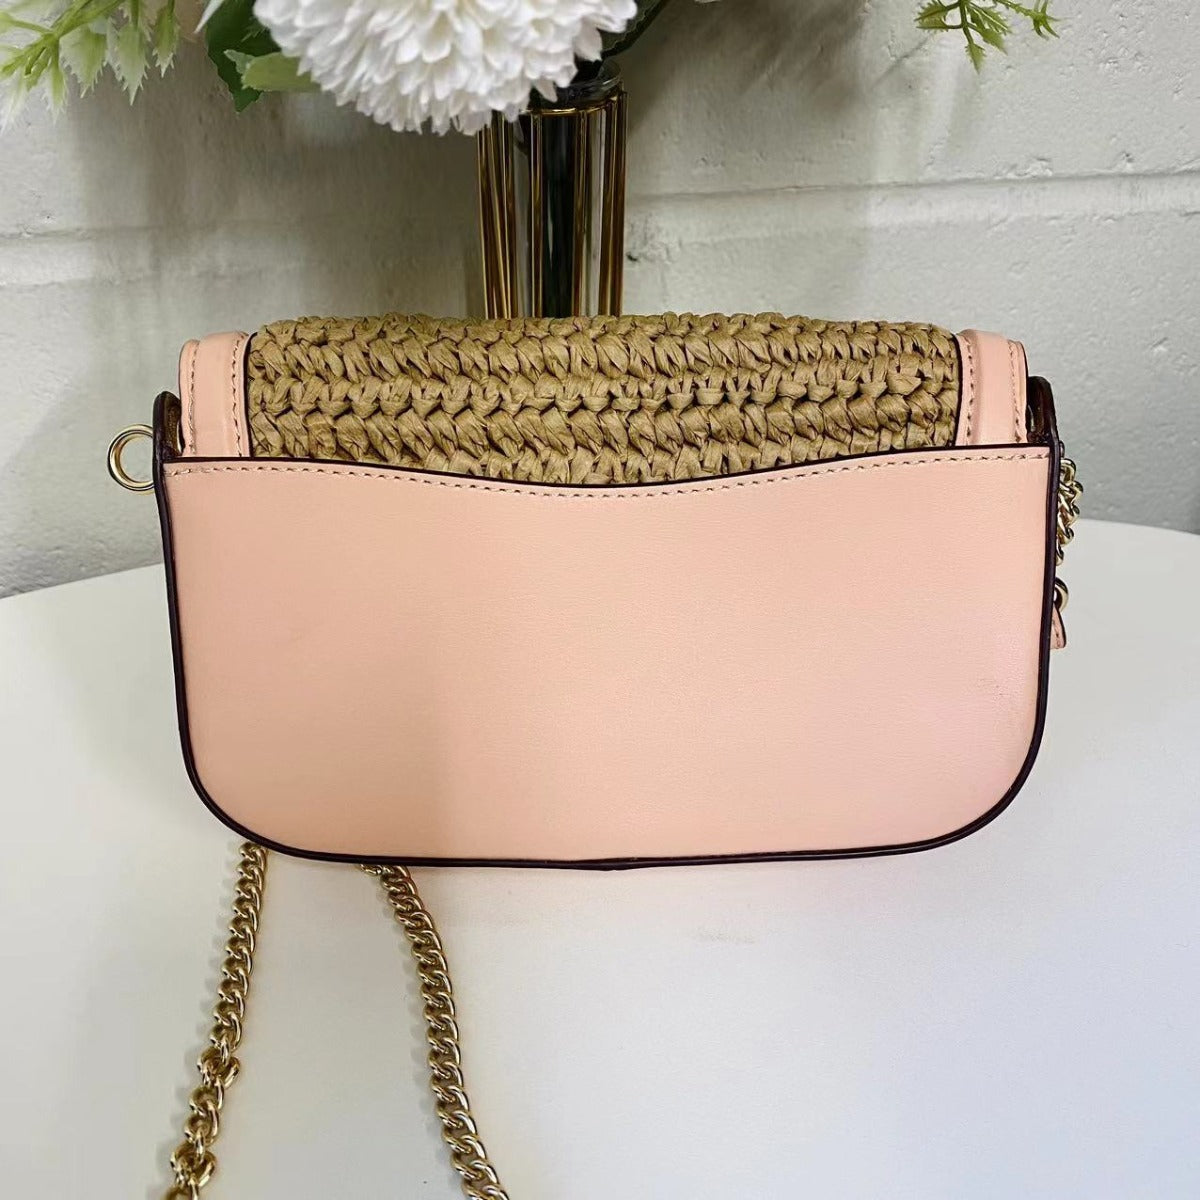 Coach C9925 Kleo Crossbody In Gold/Natural/Faded Blush